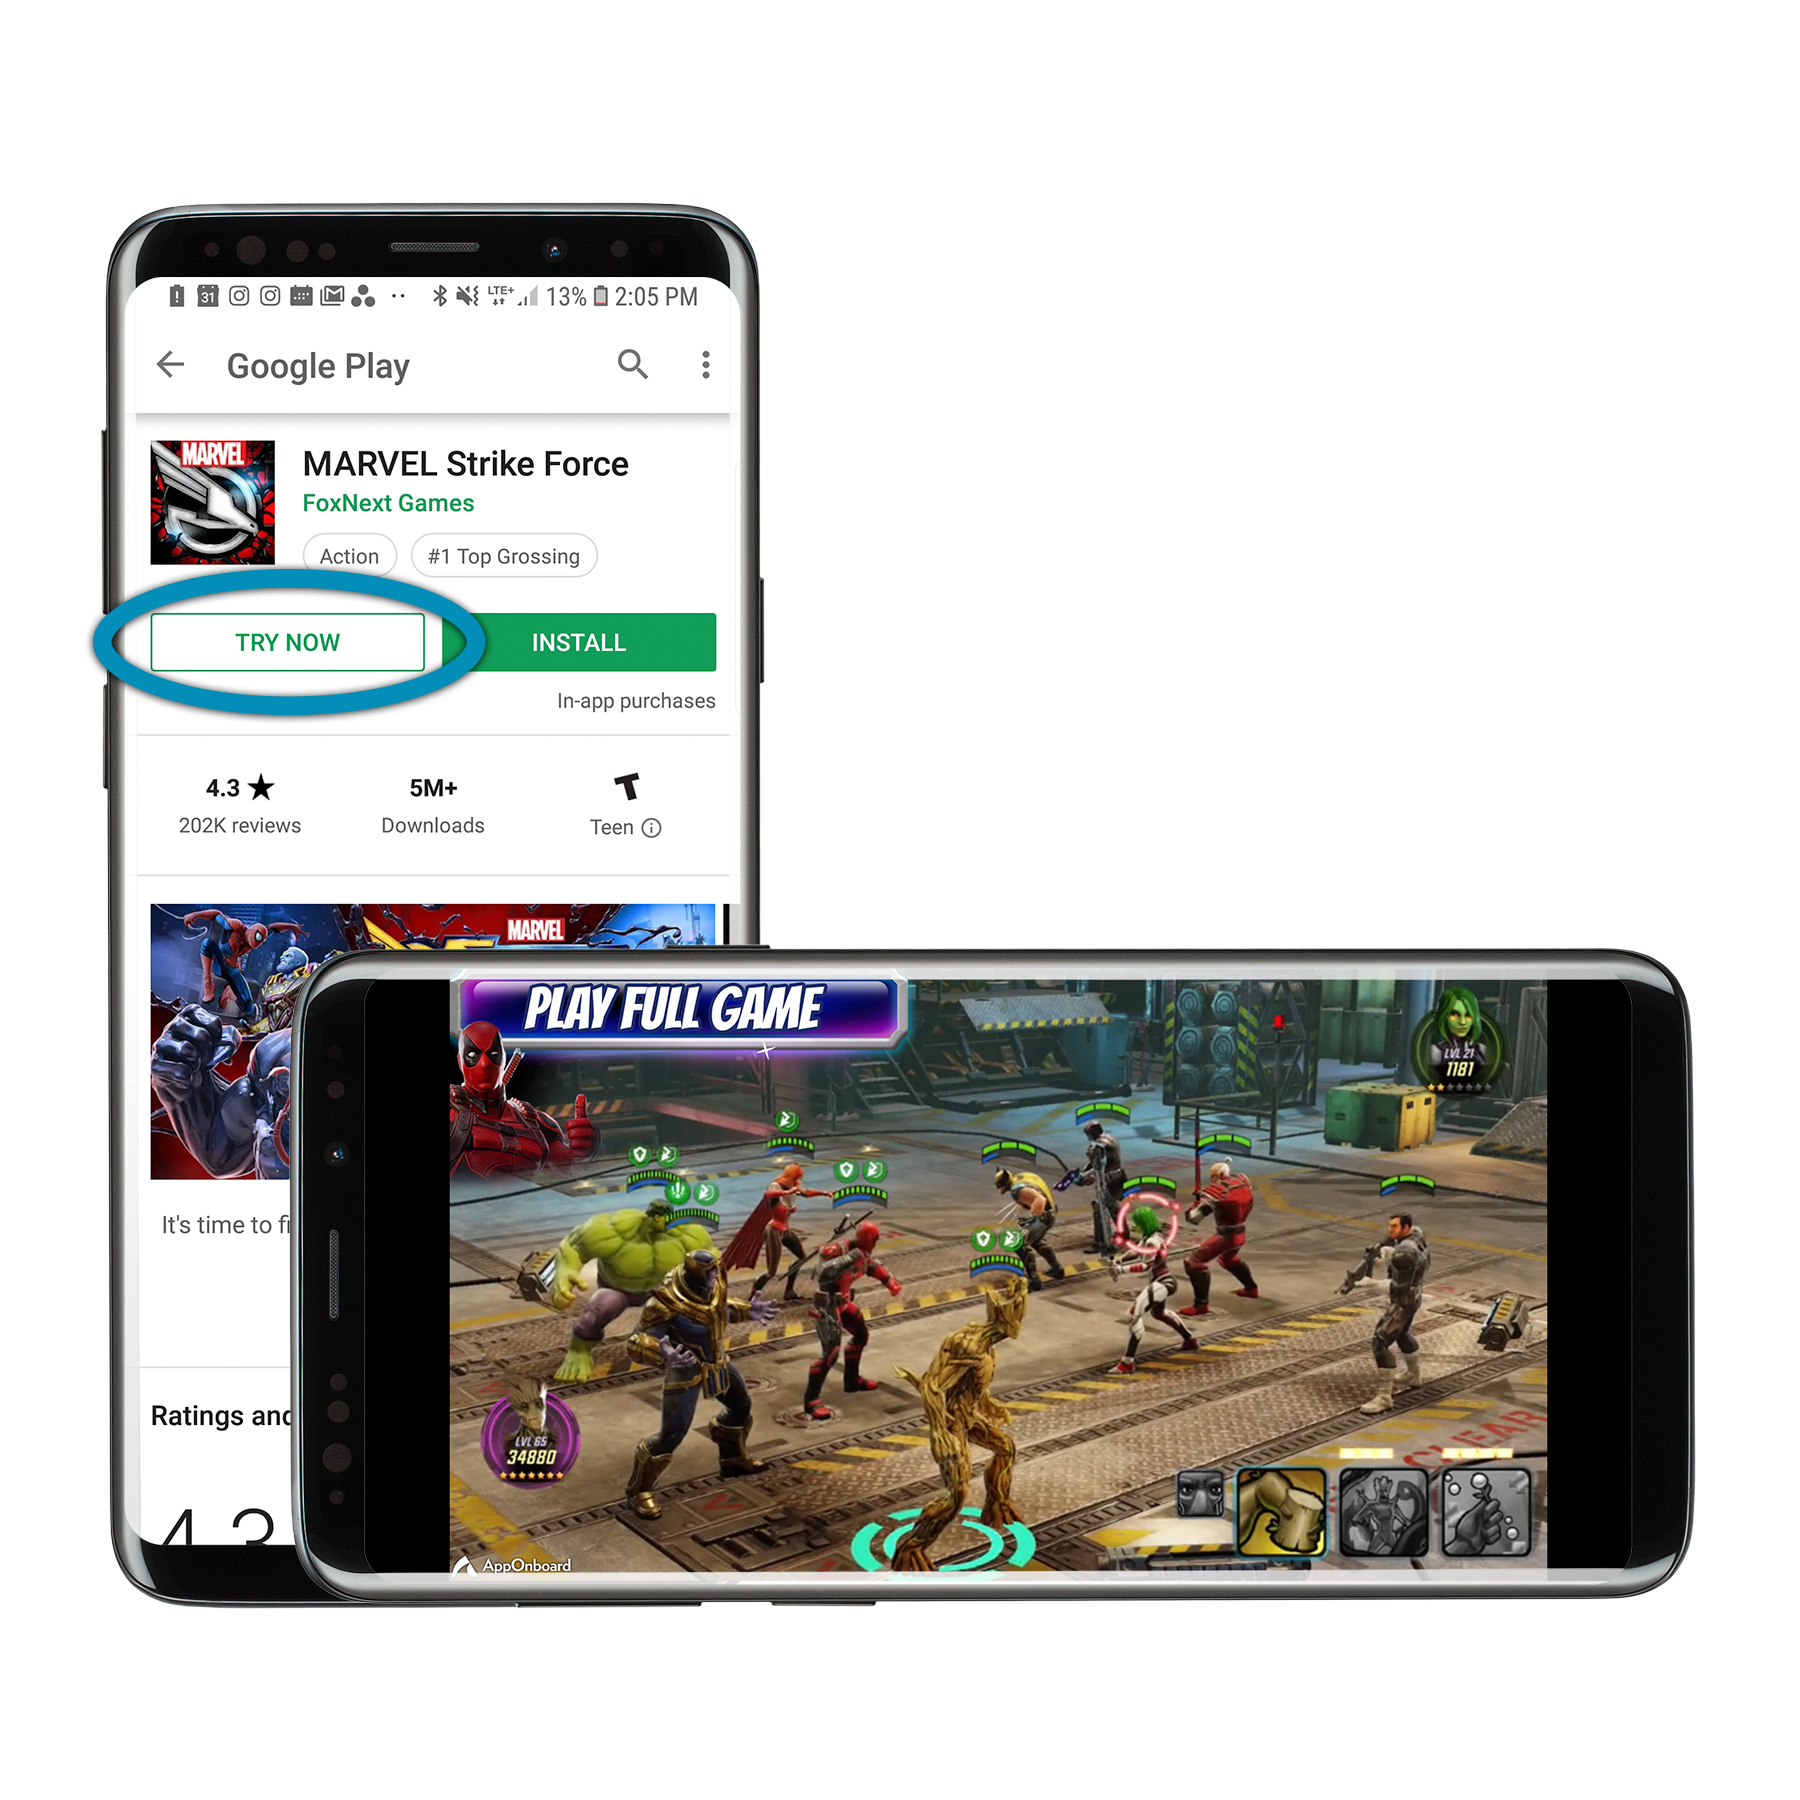 Google Play Instant lets you try Android games before downloading